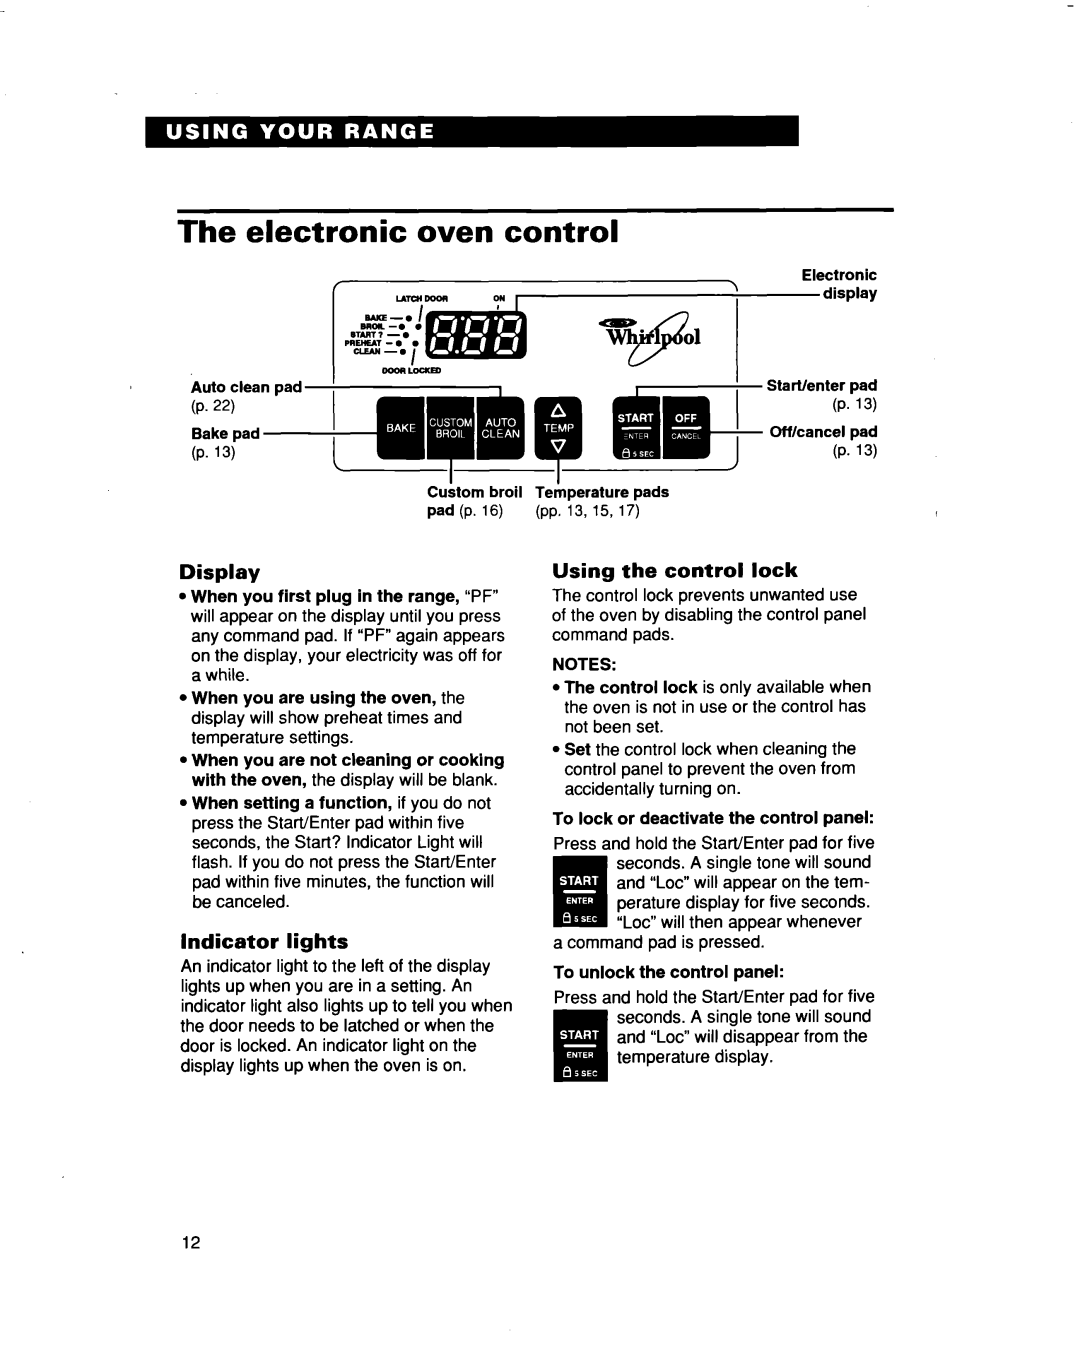 Whirlpool RF3663XD manual The electronic oven control, Display, Indicator lights, Using the control lock 